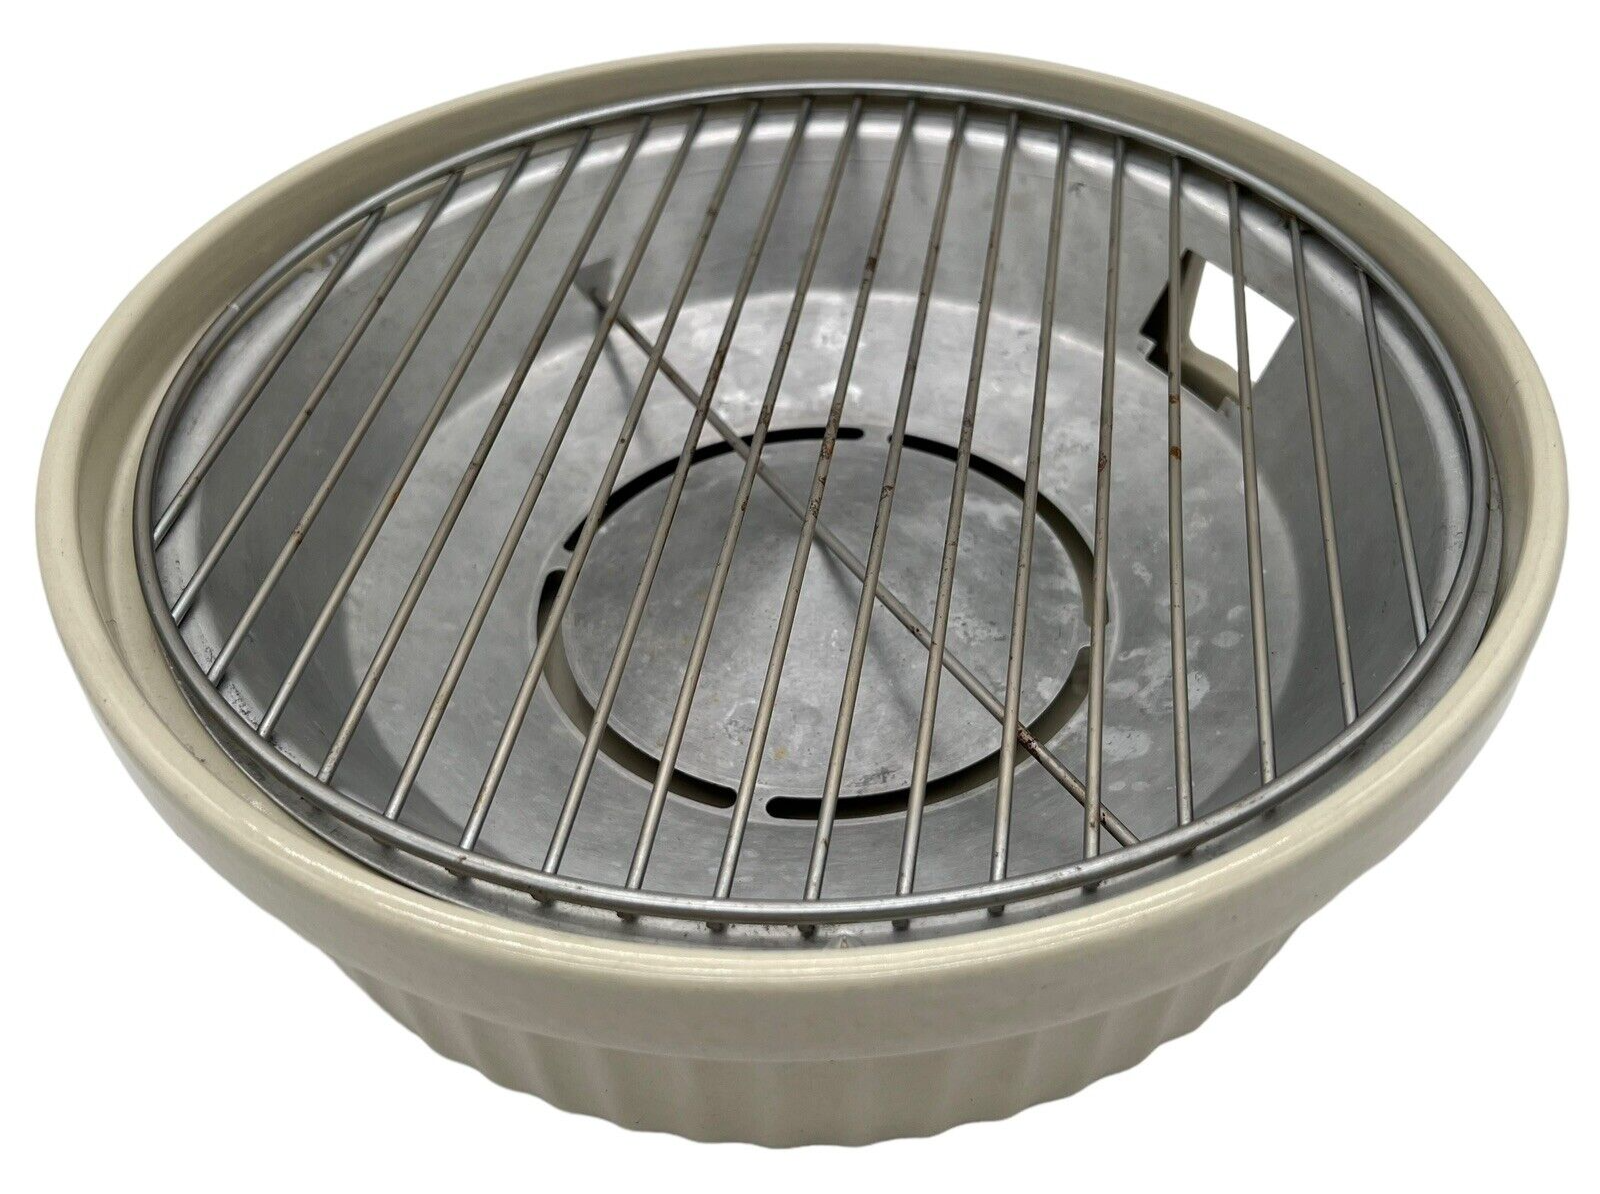 Primary image for Maverick Indoor Grill G40 Series Cool-Touch Stoneware White Ceramic BBQ WORKS